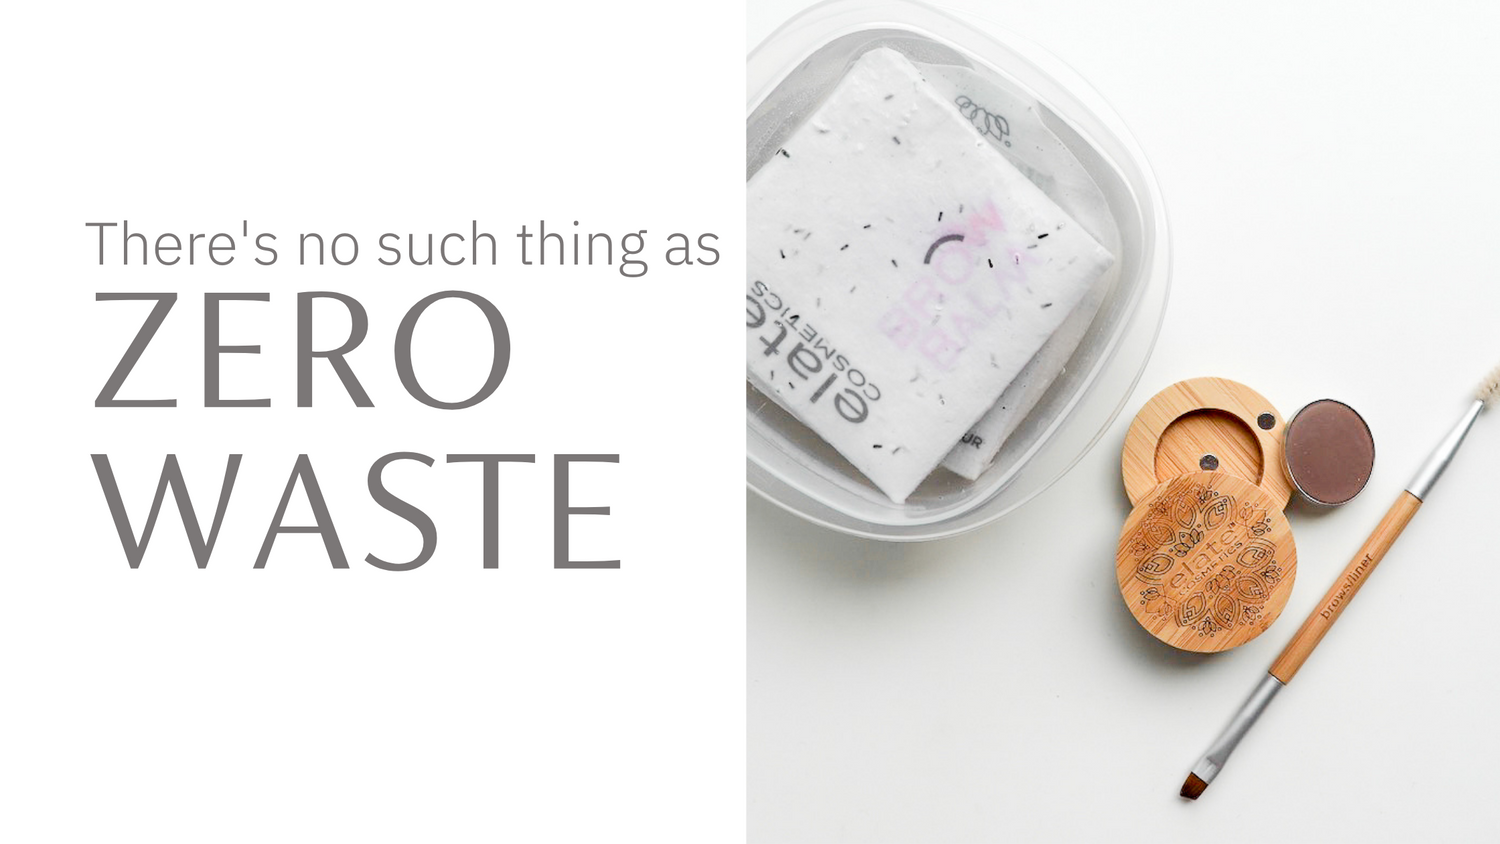 There is no such thing as zero waste